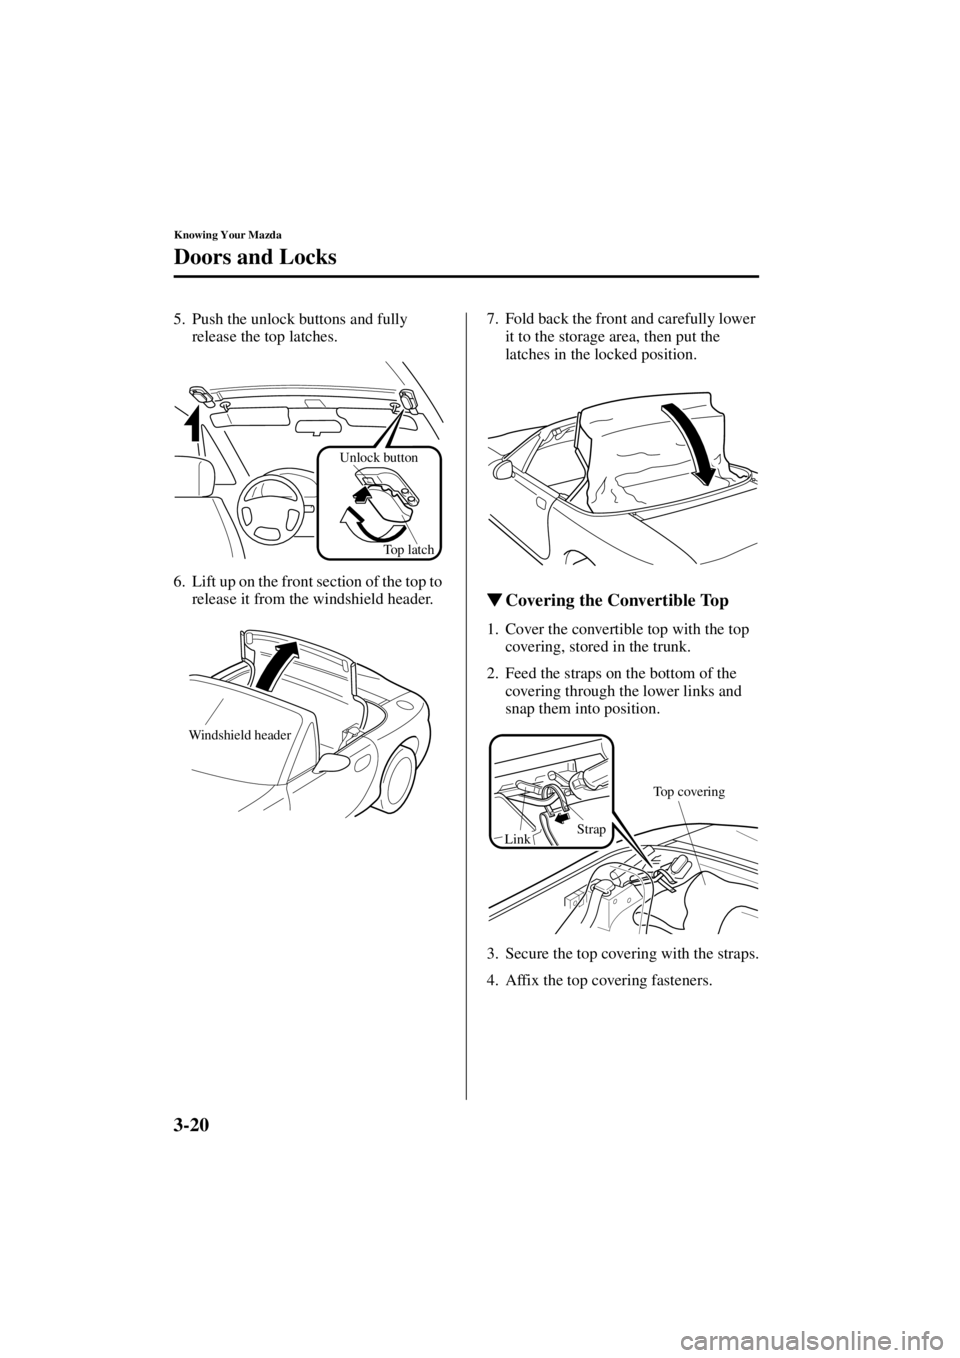 MAZDA MODEL SPEED MX-5 MIATA 2004 Workshop Manual 3-20
Knowing Your Mazda
Doors and Locks
Form No. 8T02-EA-03L
5. Push the unlock buttons and fully release the top latches.
6. Lift up on the front section of the top to  release it from the windshield